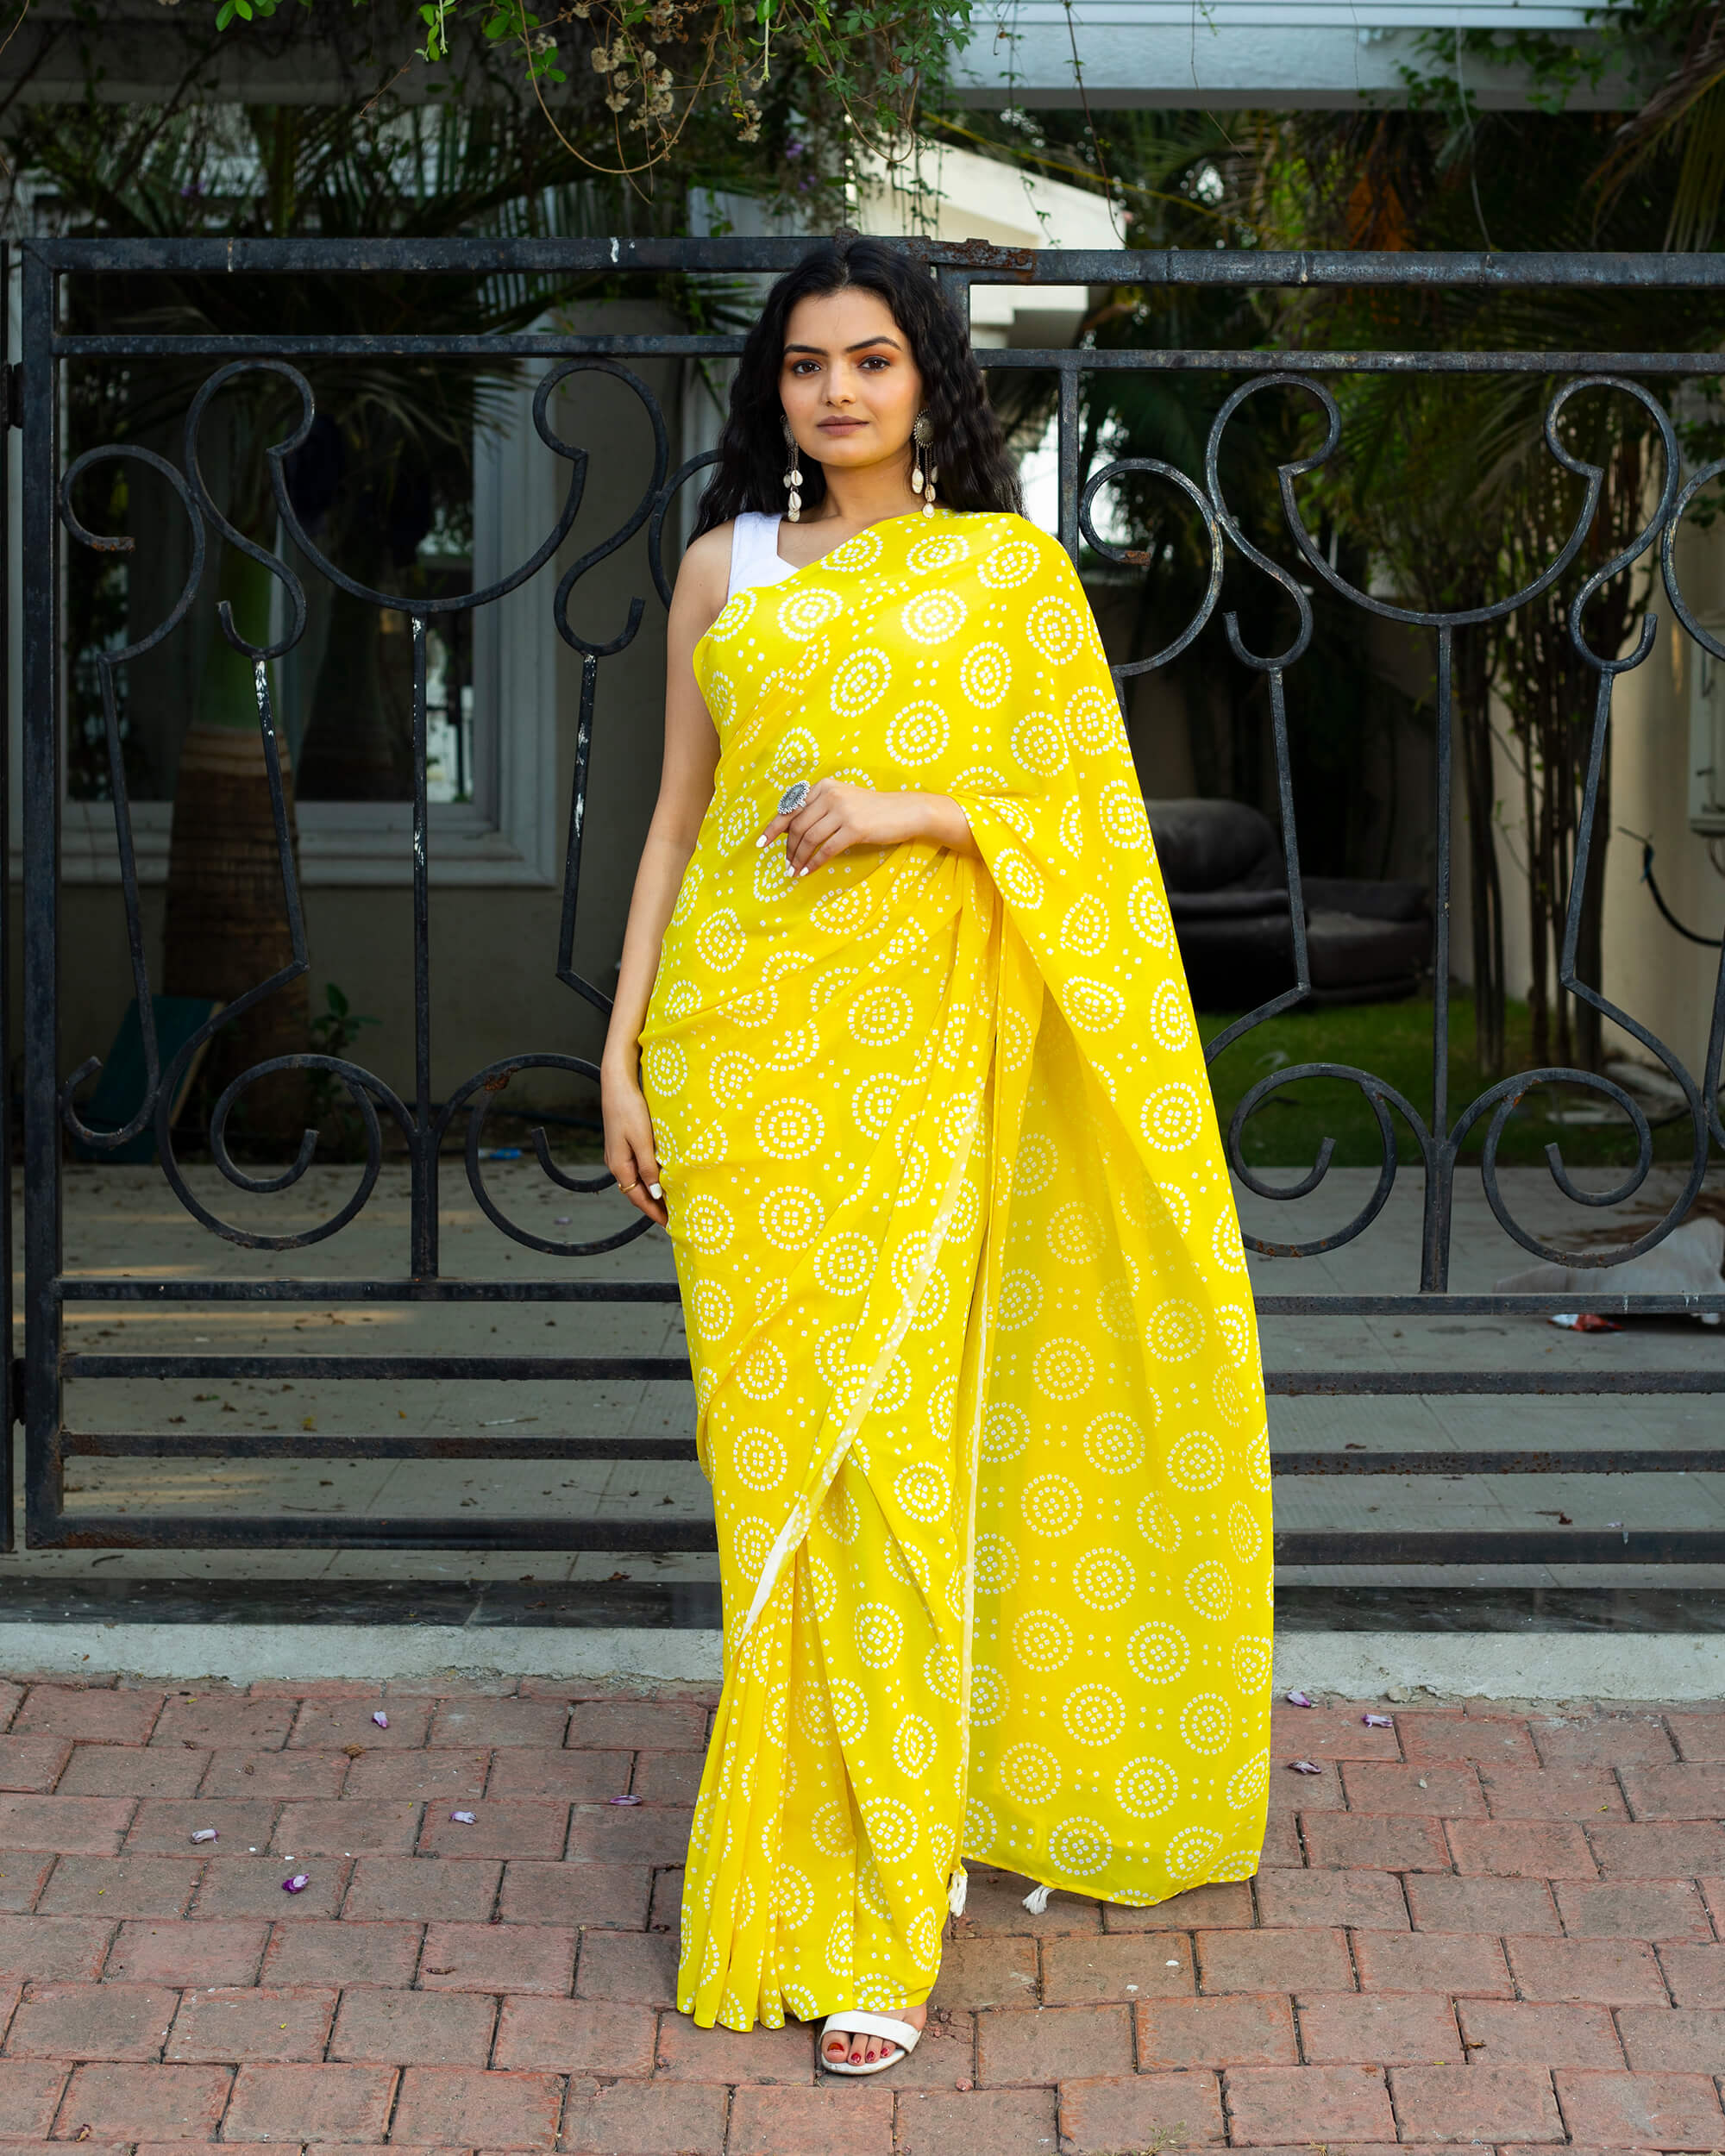 Linen by Linen 100 Count White With Yellow Pure Organic Handwoven Saree, yellow Linen Saree With Blouse,lenin Saree,yellow Saree,indian Saree - Etsy